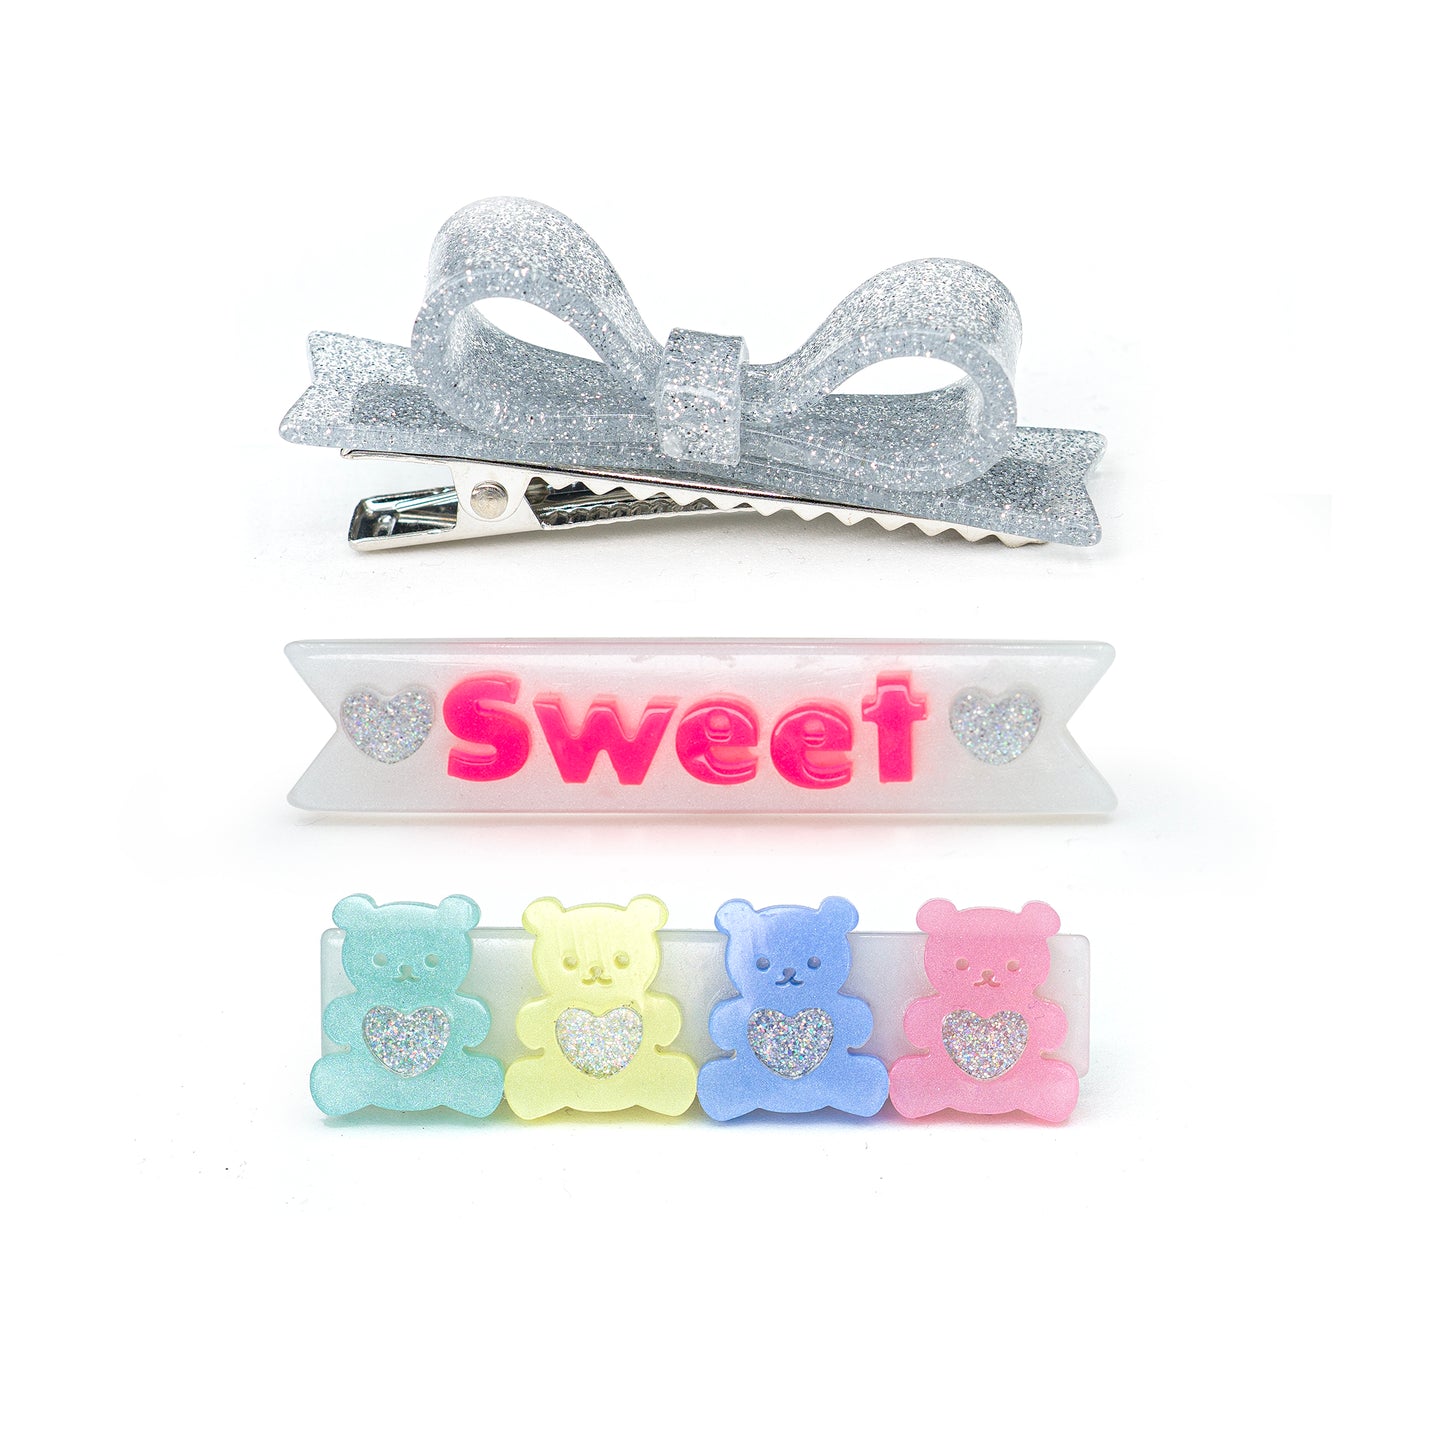 VAL24 - Sweet Bears and Bowtie Glitter Hair Clips